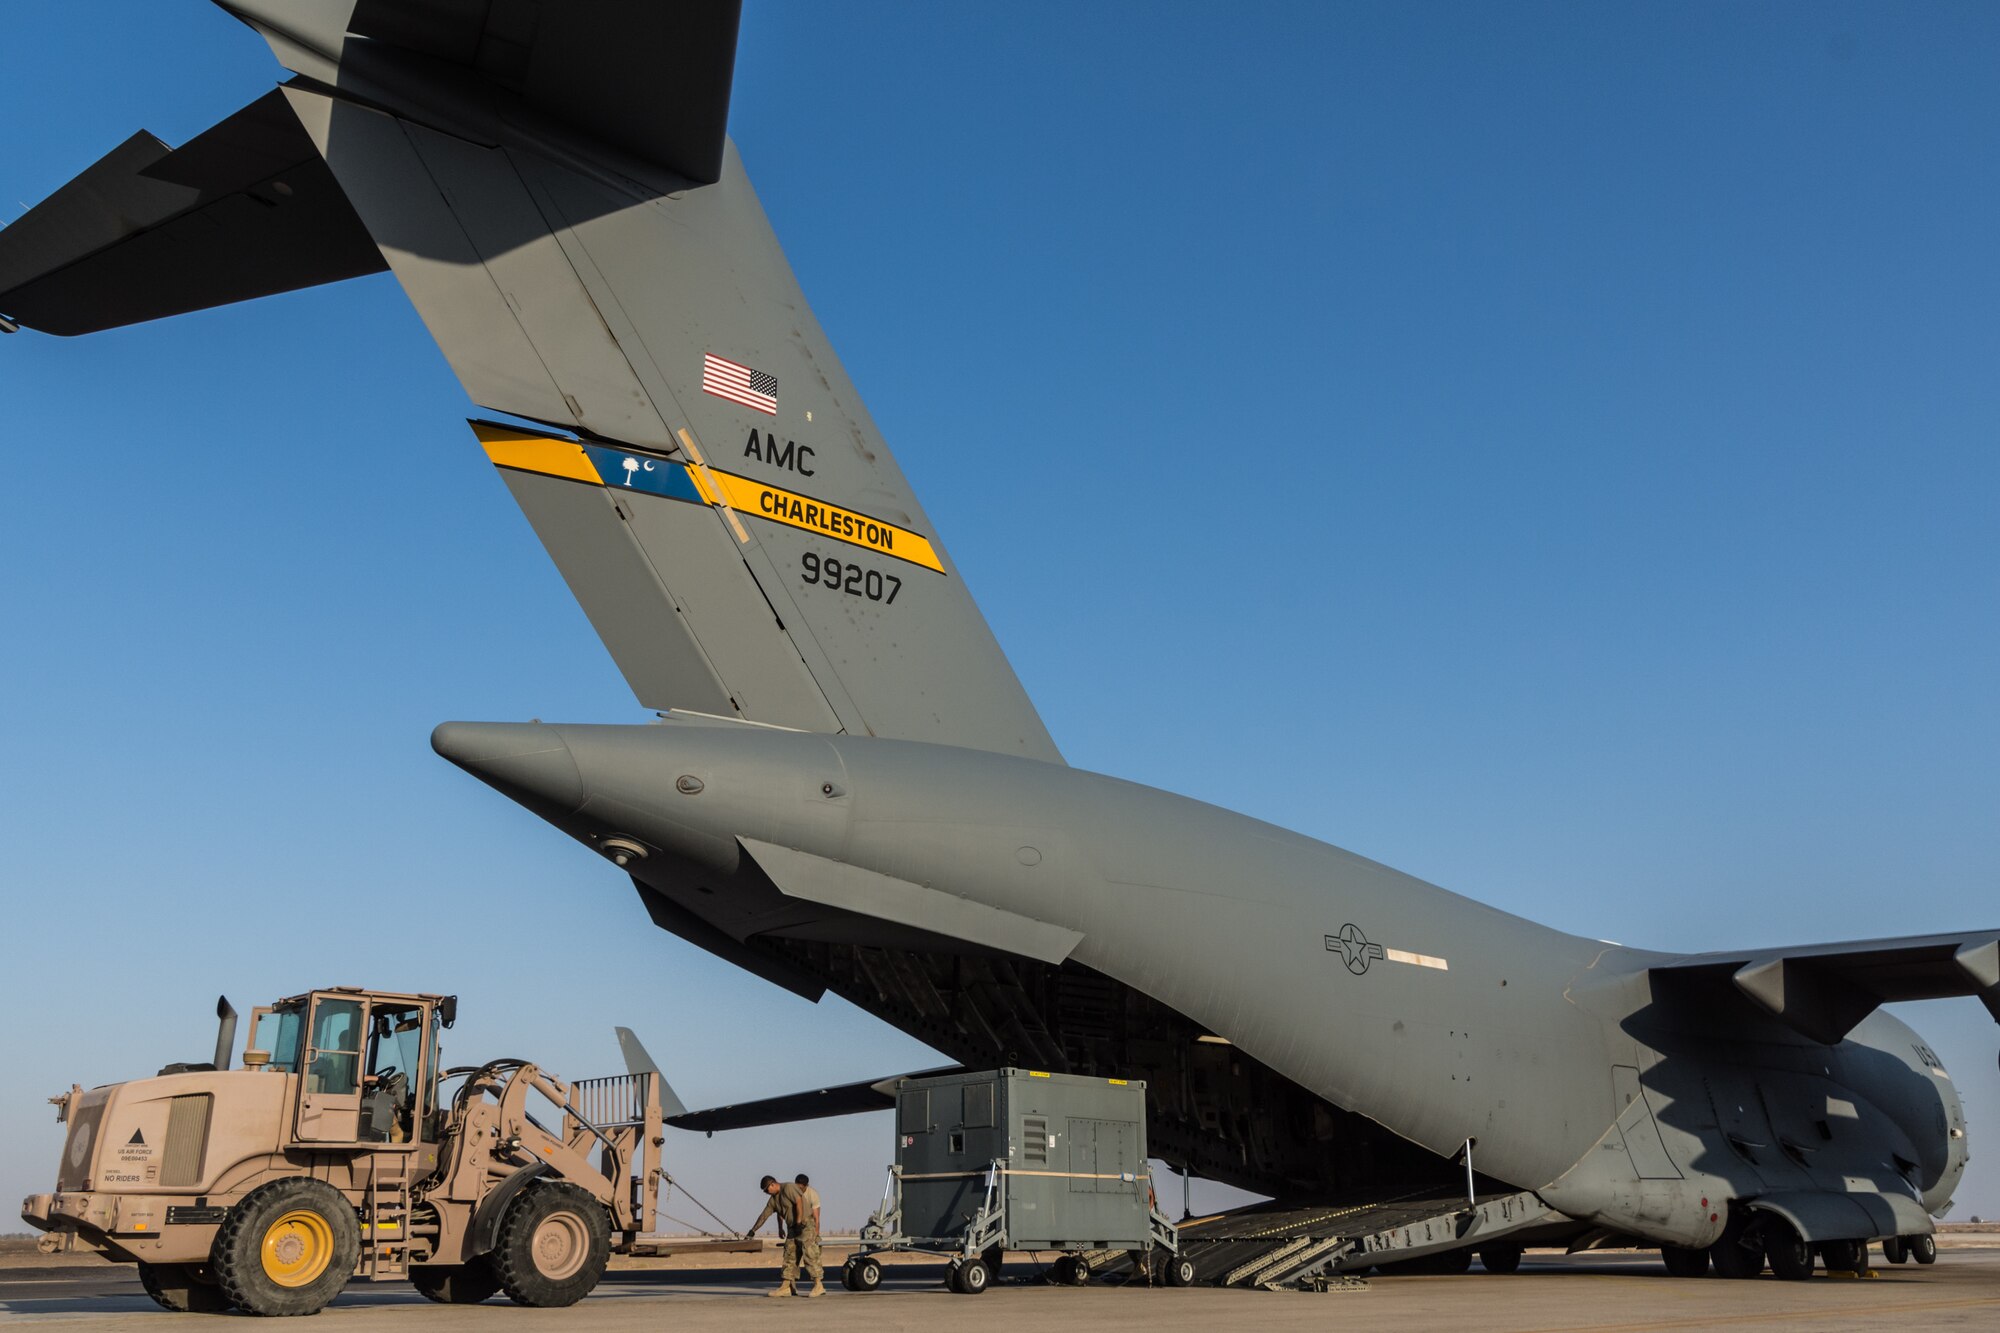 Personnel from the 816th Expeditionary Airlift Squadron and 332nd Air Expeditionary Wing offload cargo from a C-17 Globemaster III at an undisclosed location in Southwest Asia after being transported between U.S. Africa Command and U.S. Central Command, Aug. 28, 2018. Al Udeid-based aircraft have completed nearly 15 missions this calendar year between the two commands. (U.S. Air Force photo by Tech. Sgt. Ted Nichols/Released)